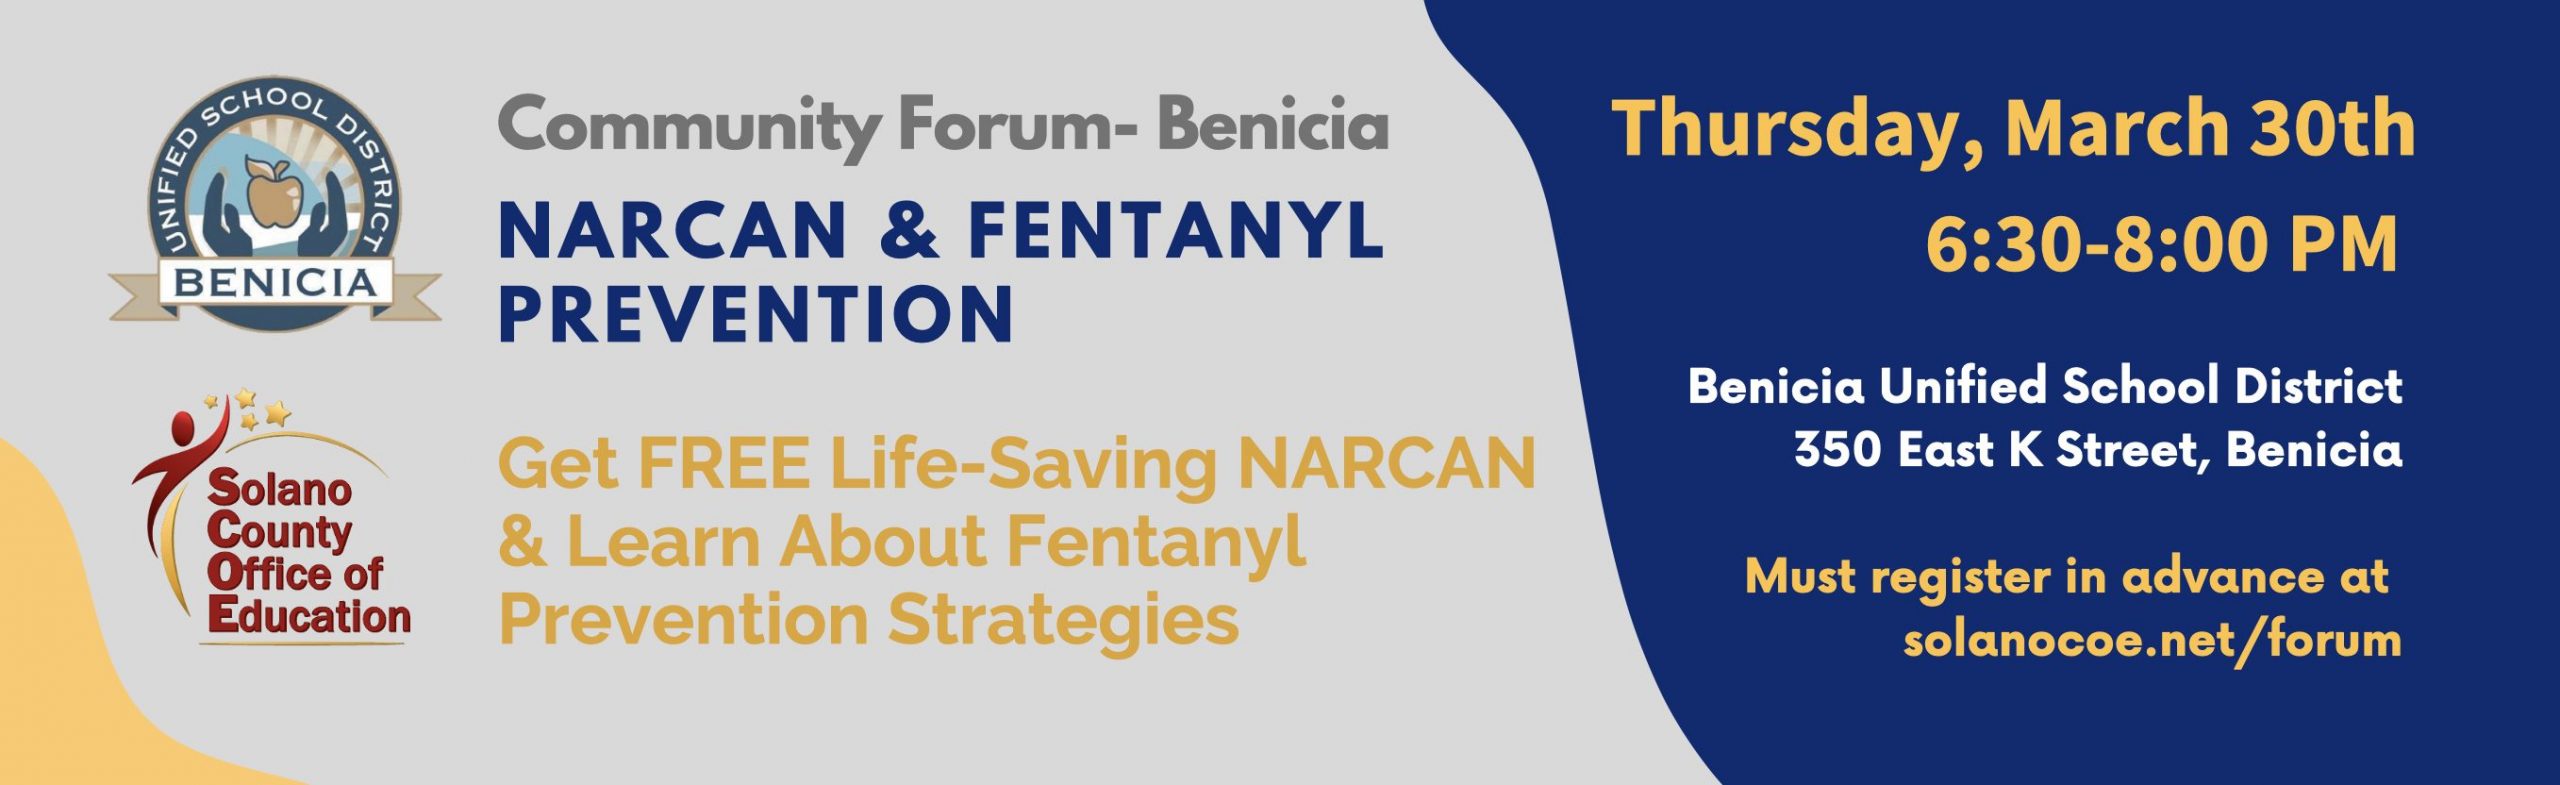 Community forum narcan and fentanyl prevention. Get free life saving narcan and learn about fentanyl prevention. Thursday March 30th 6:30-8pm BUSD 350 east K st benicia. Must register in advance at solanocoe.net/forum